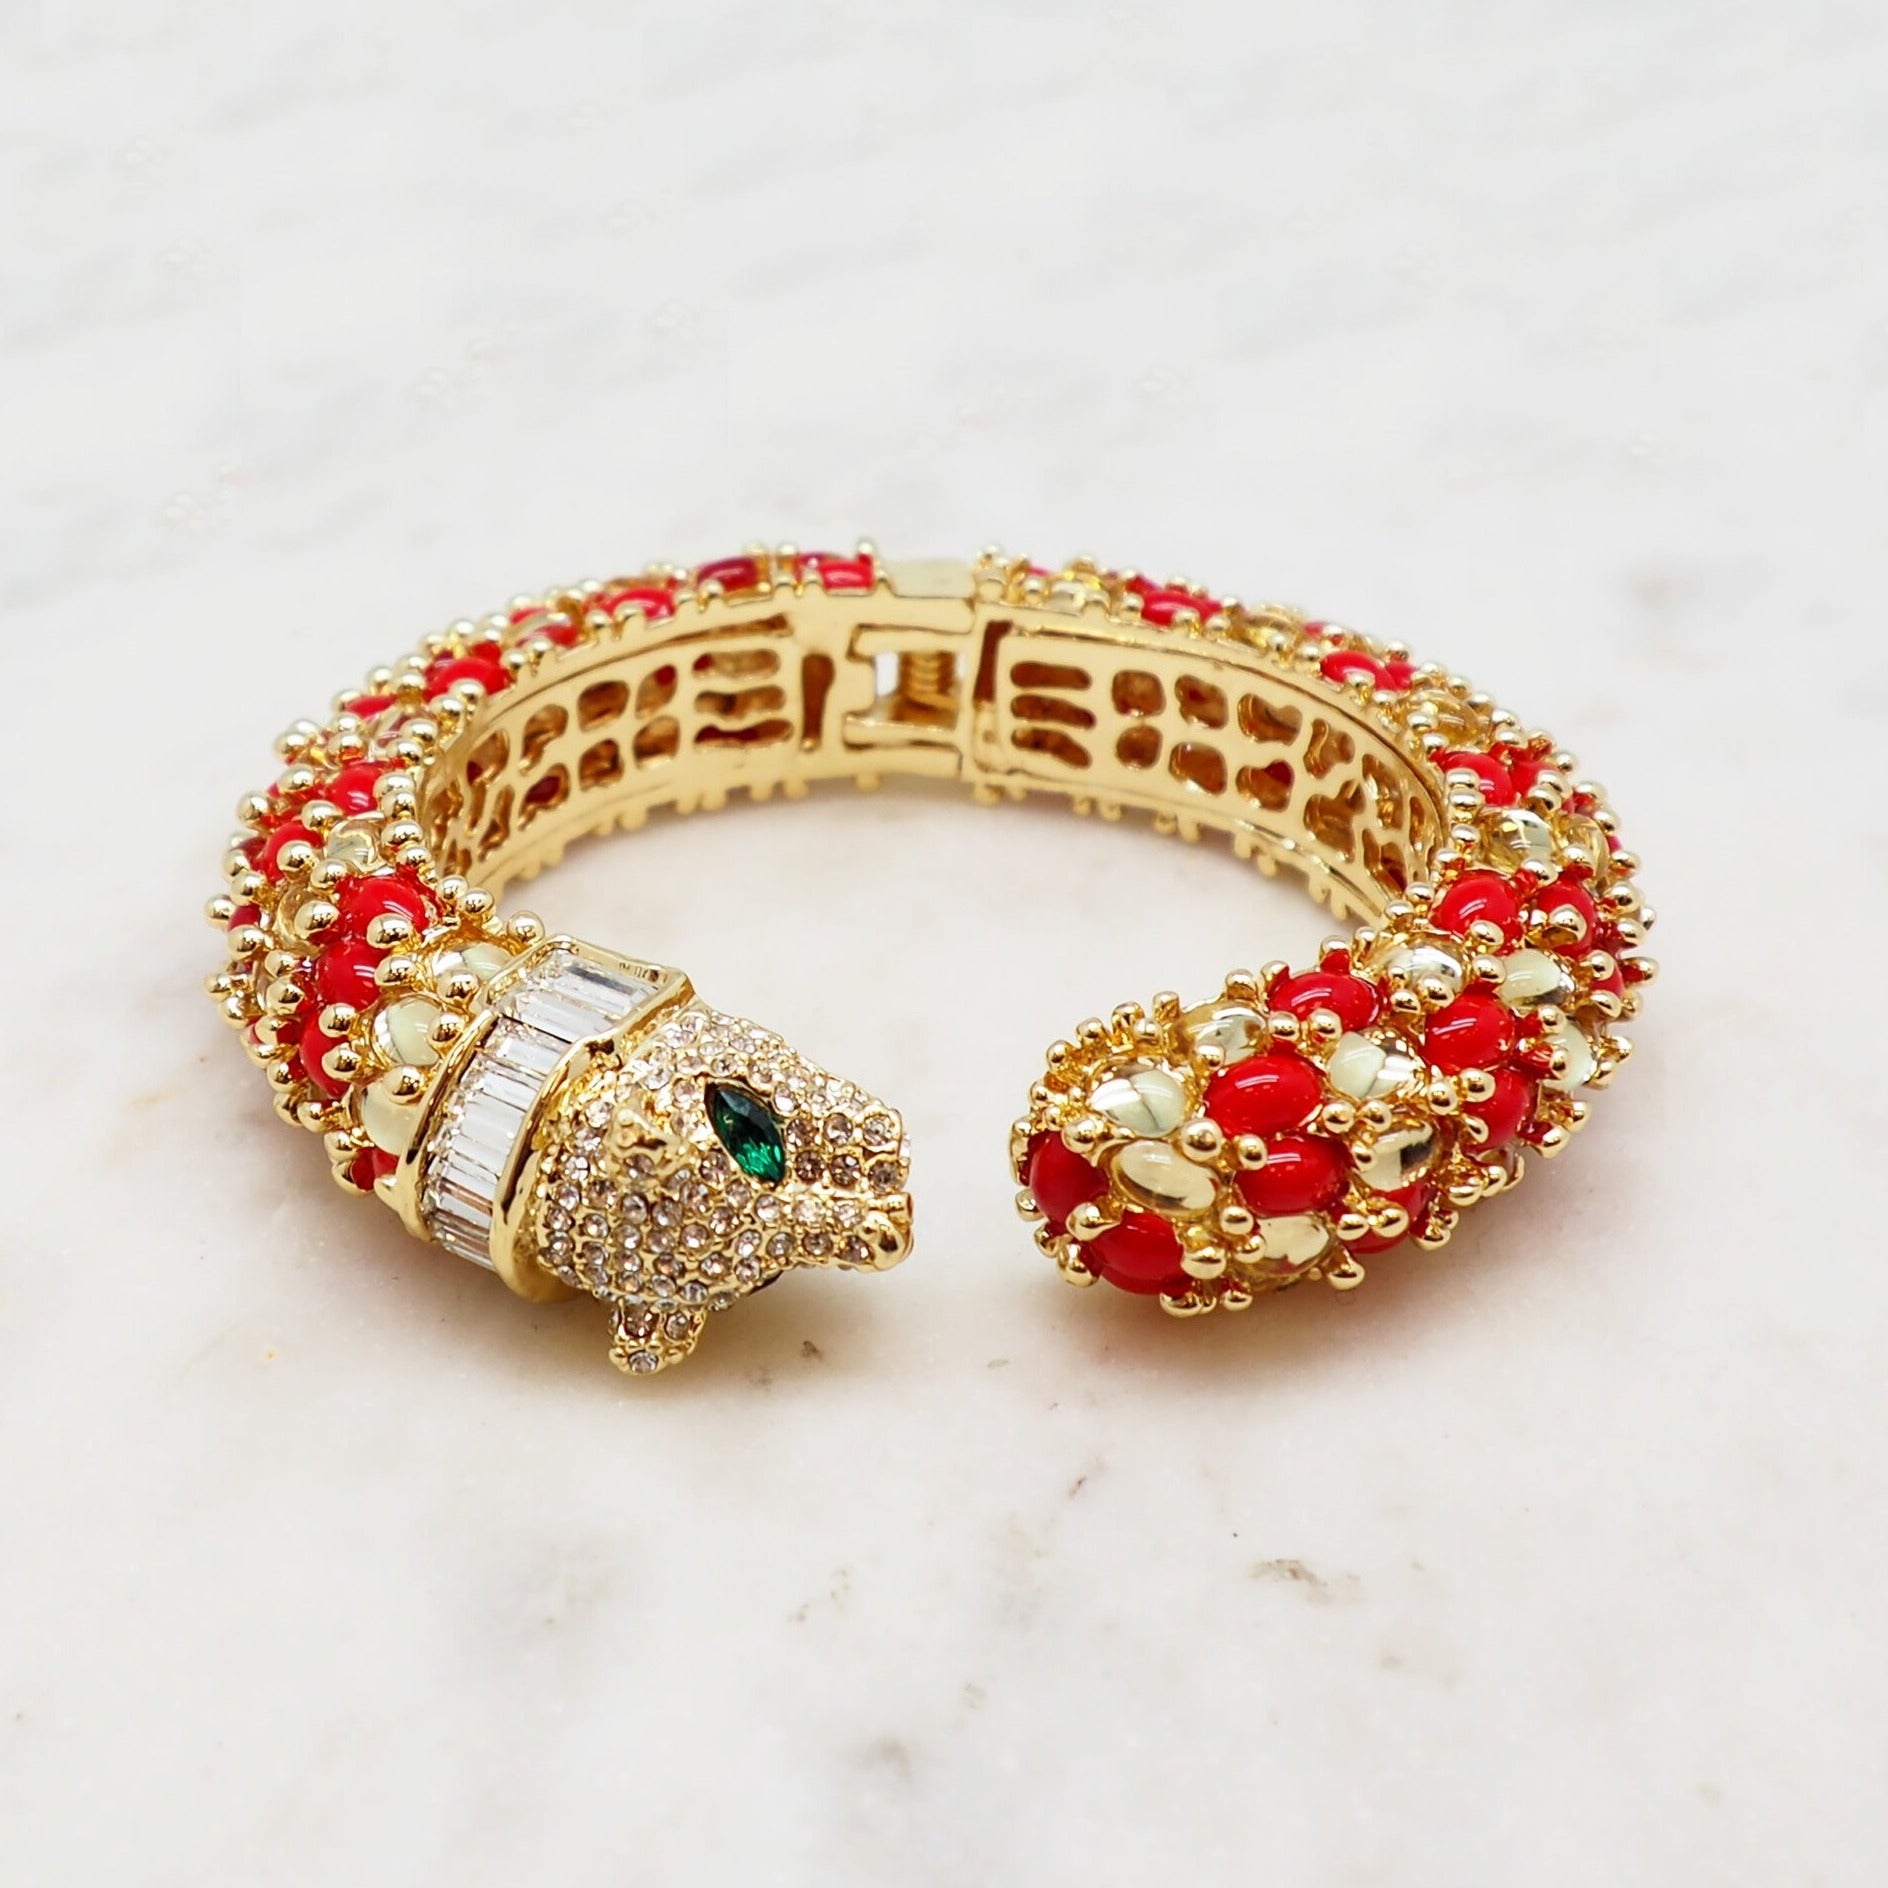 The Tiger Bangle - Red and Gold